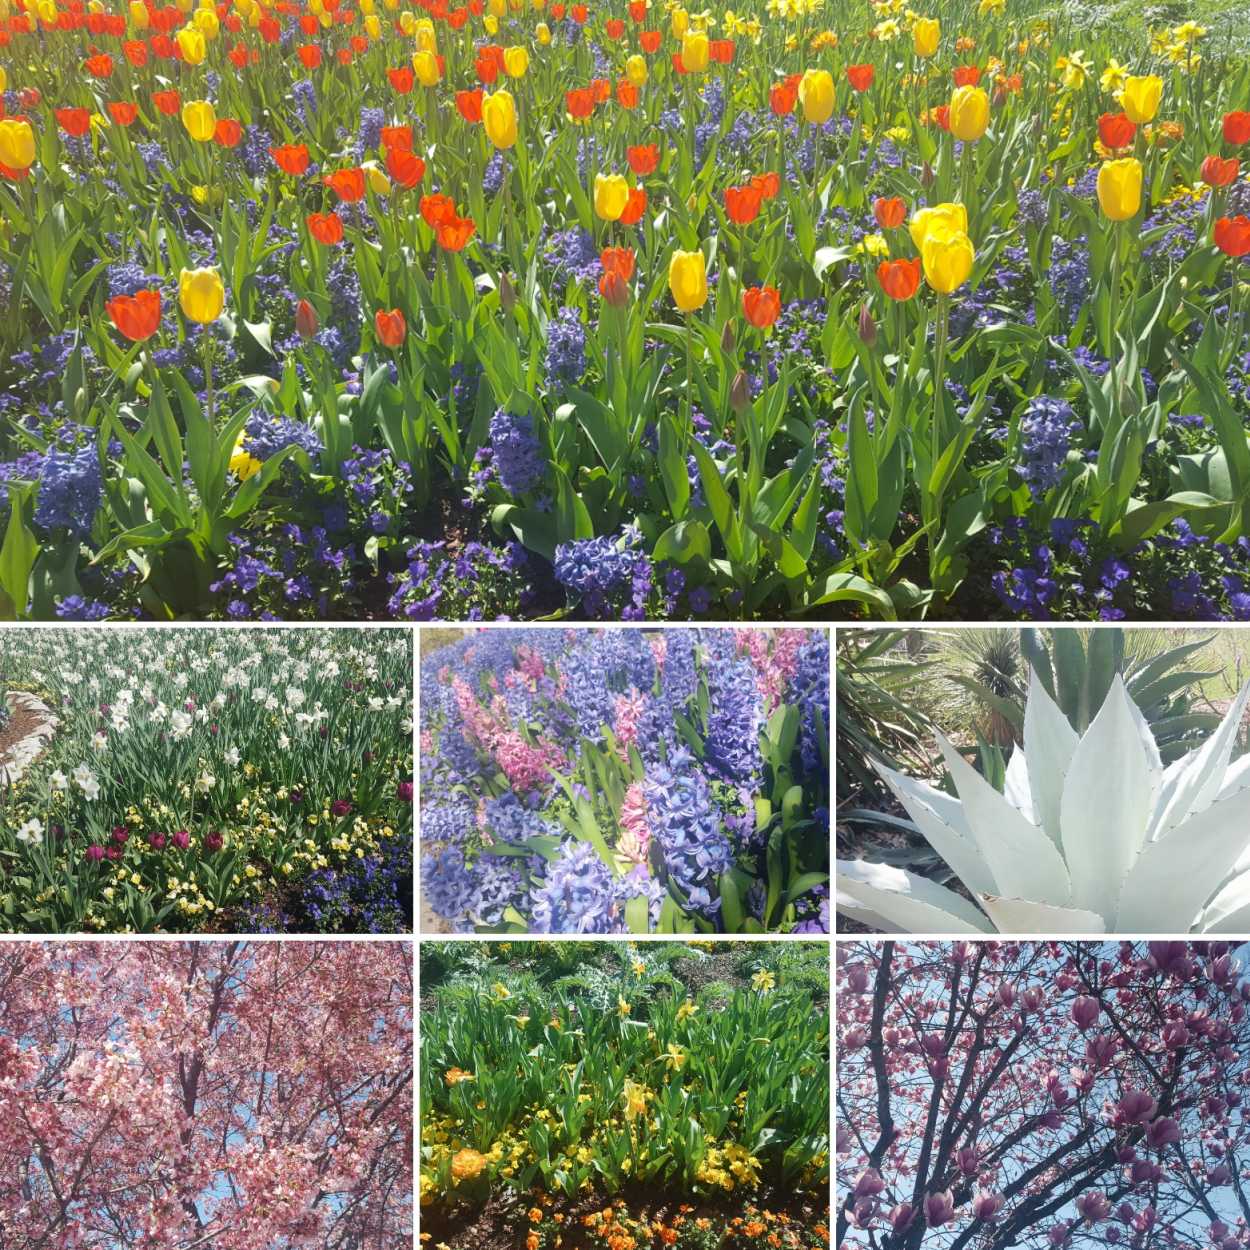 Collage of flowers at the Dallas Arboretum and Botanical Gardens